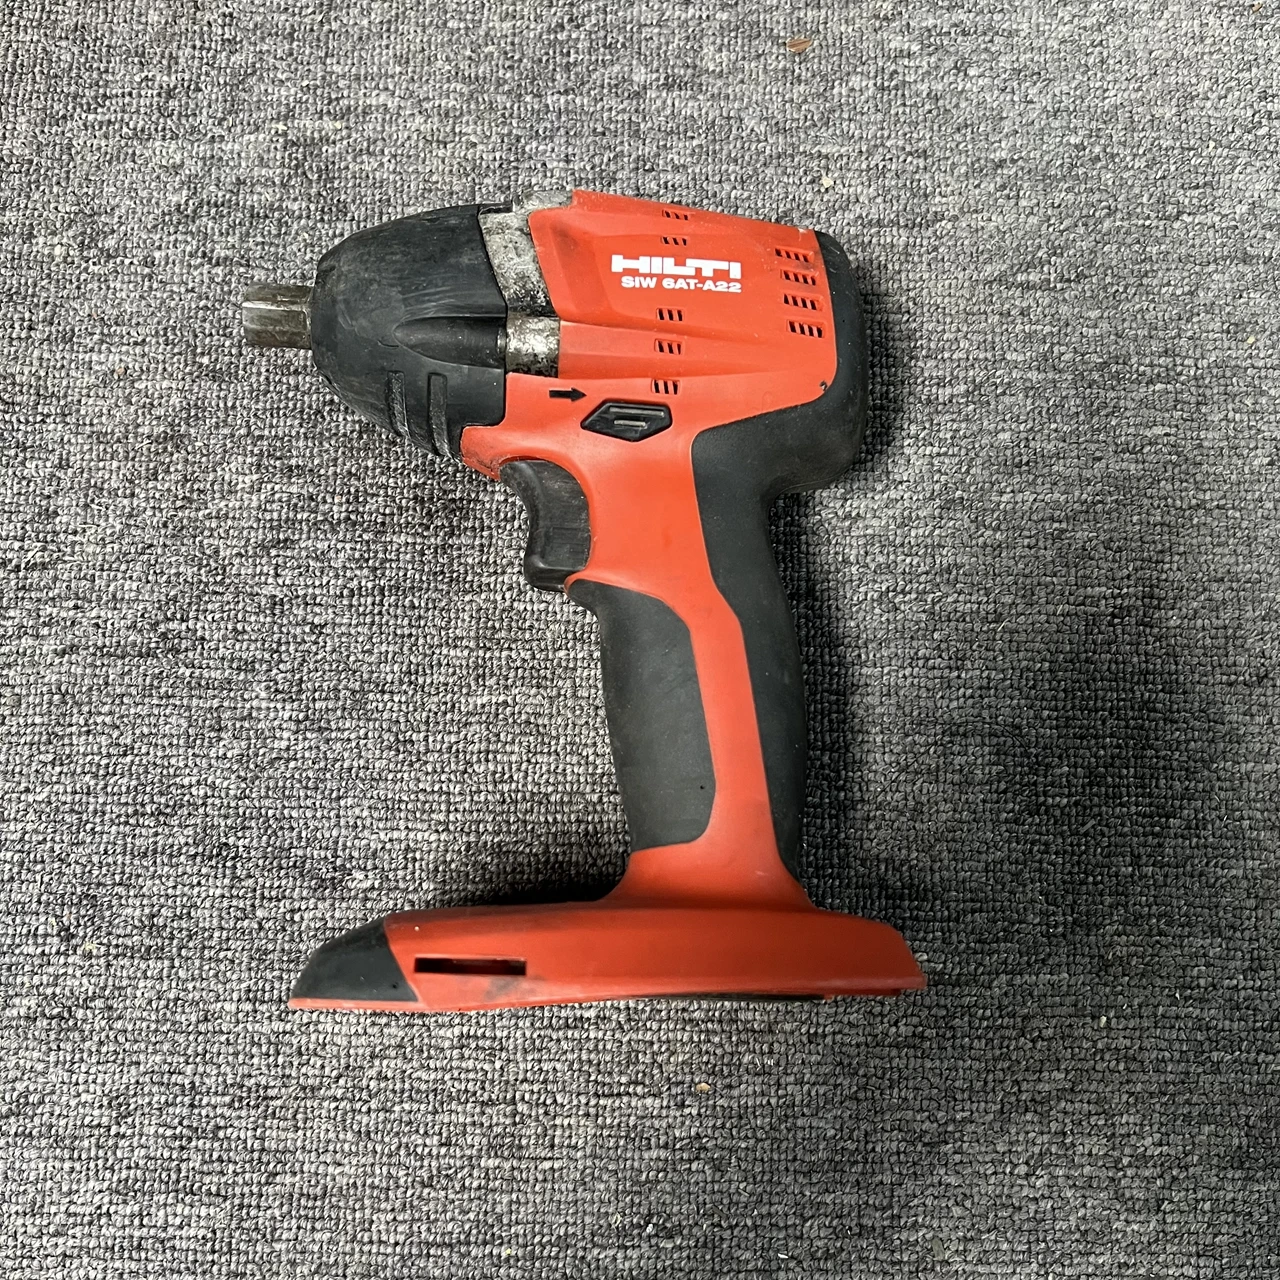 Hilti SIW 6AT-A22 Cordless Brushless Impact Wrench 1/2